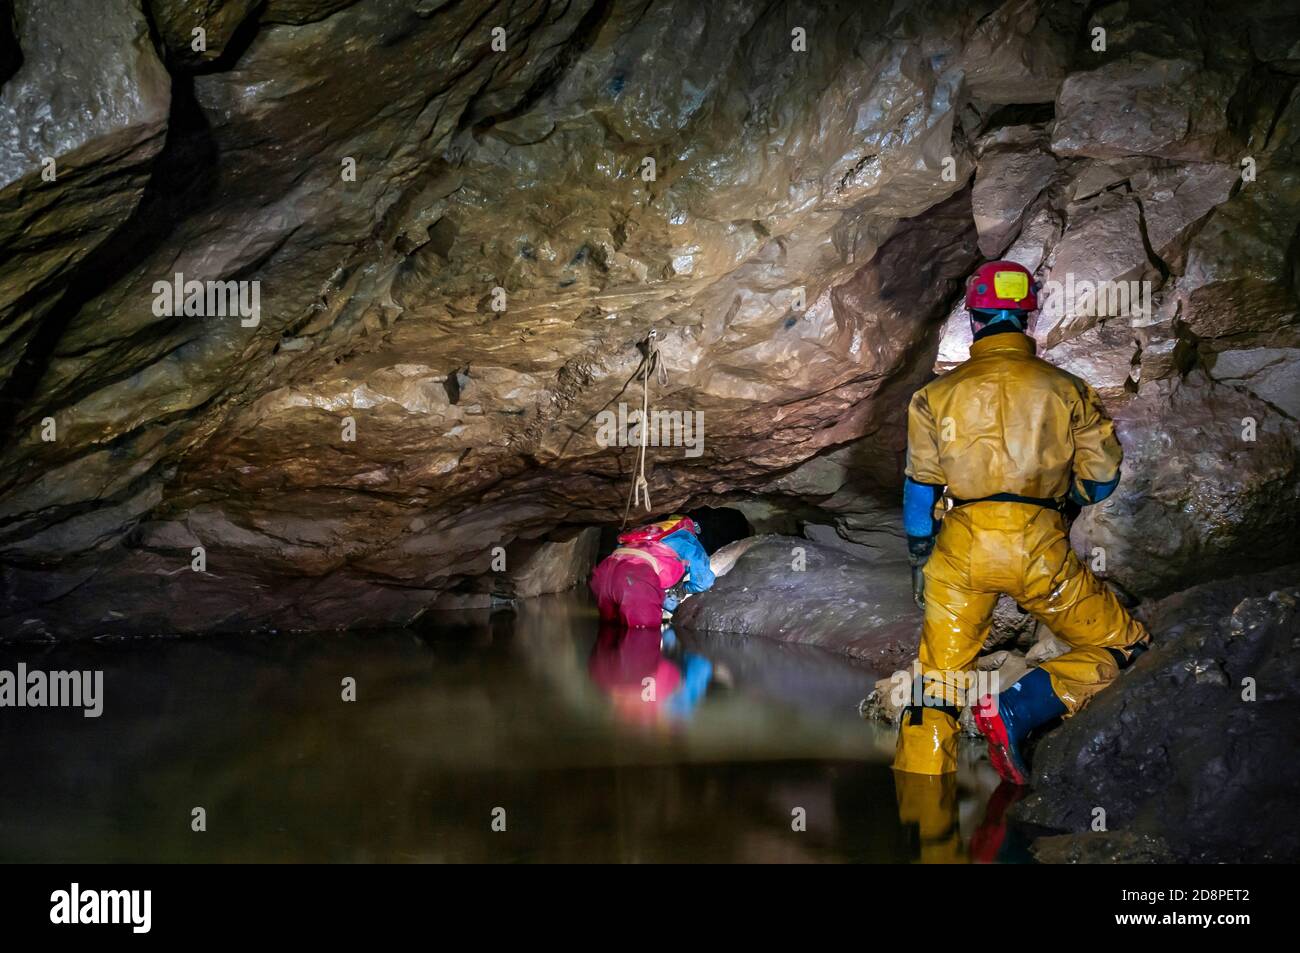 A part-flooded natural cave chamber with a lead miners' tunnel blasted at the far end, in Speedwell Cavern in Castleton, Derbyshire. Stock Photo